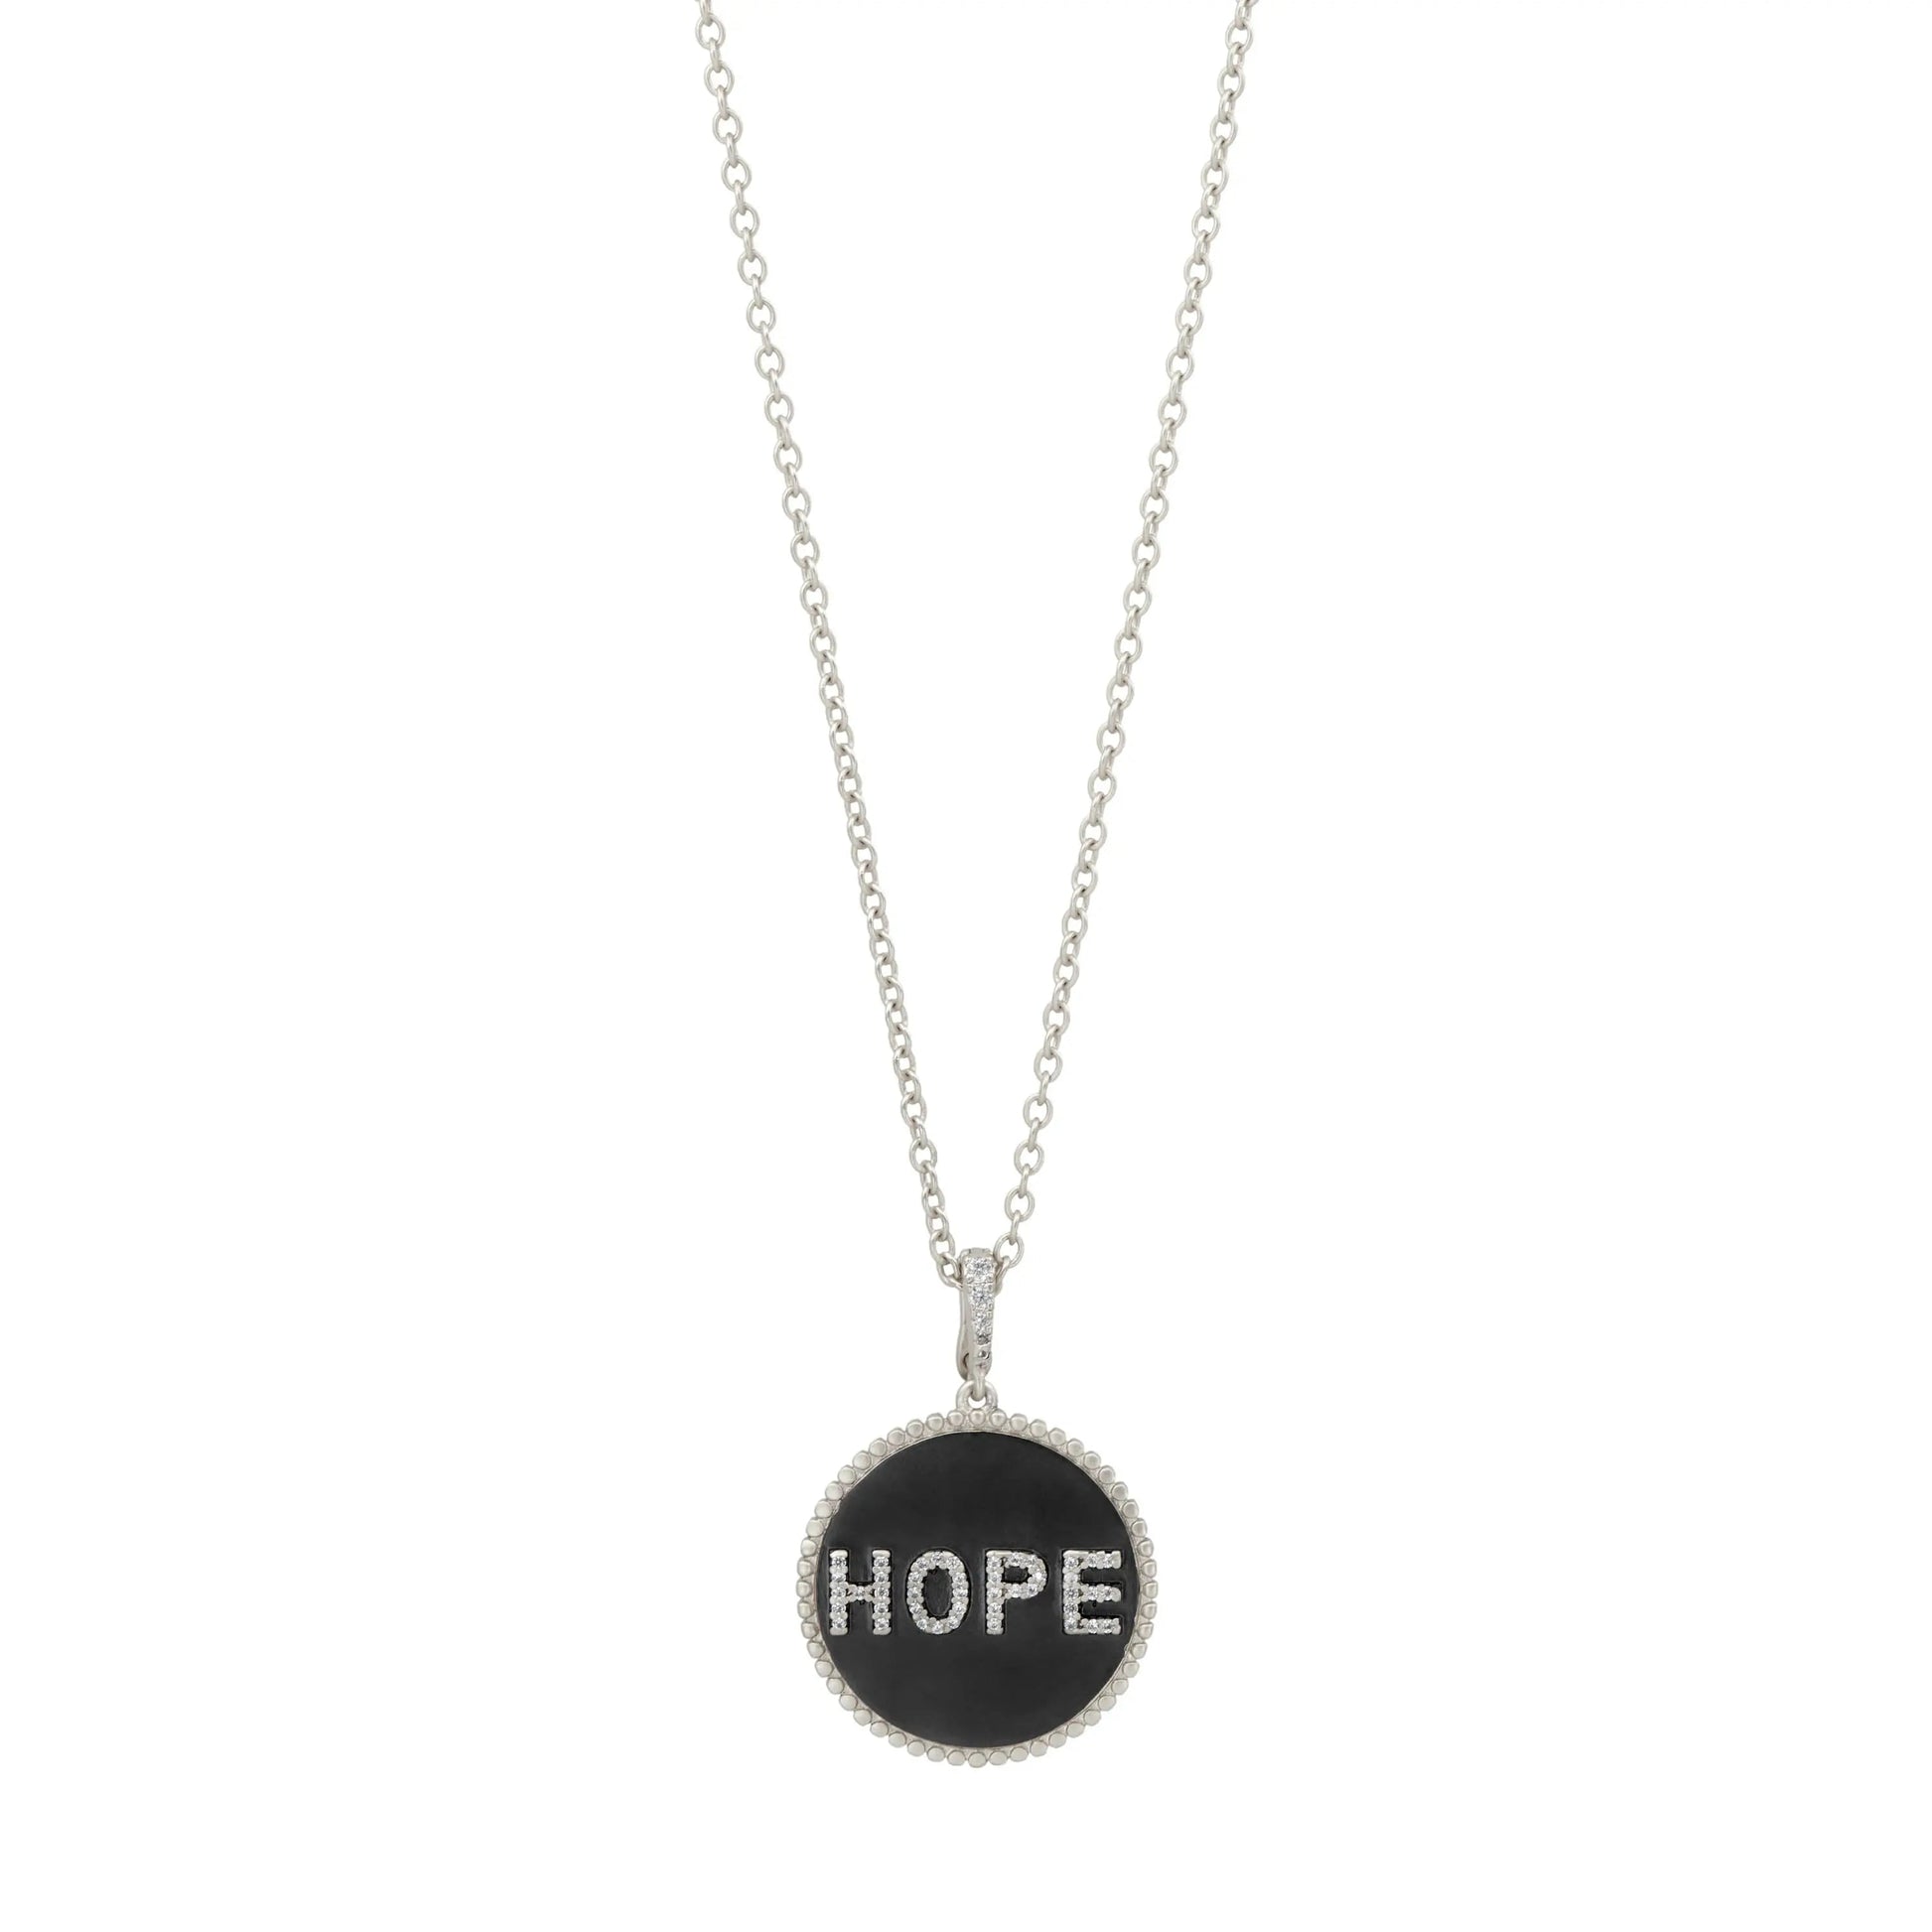 BlackSilver Double Sided HOPE Pendant Necklace Women of Strength NECKLACE